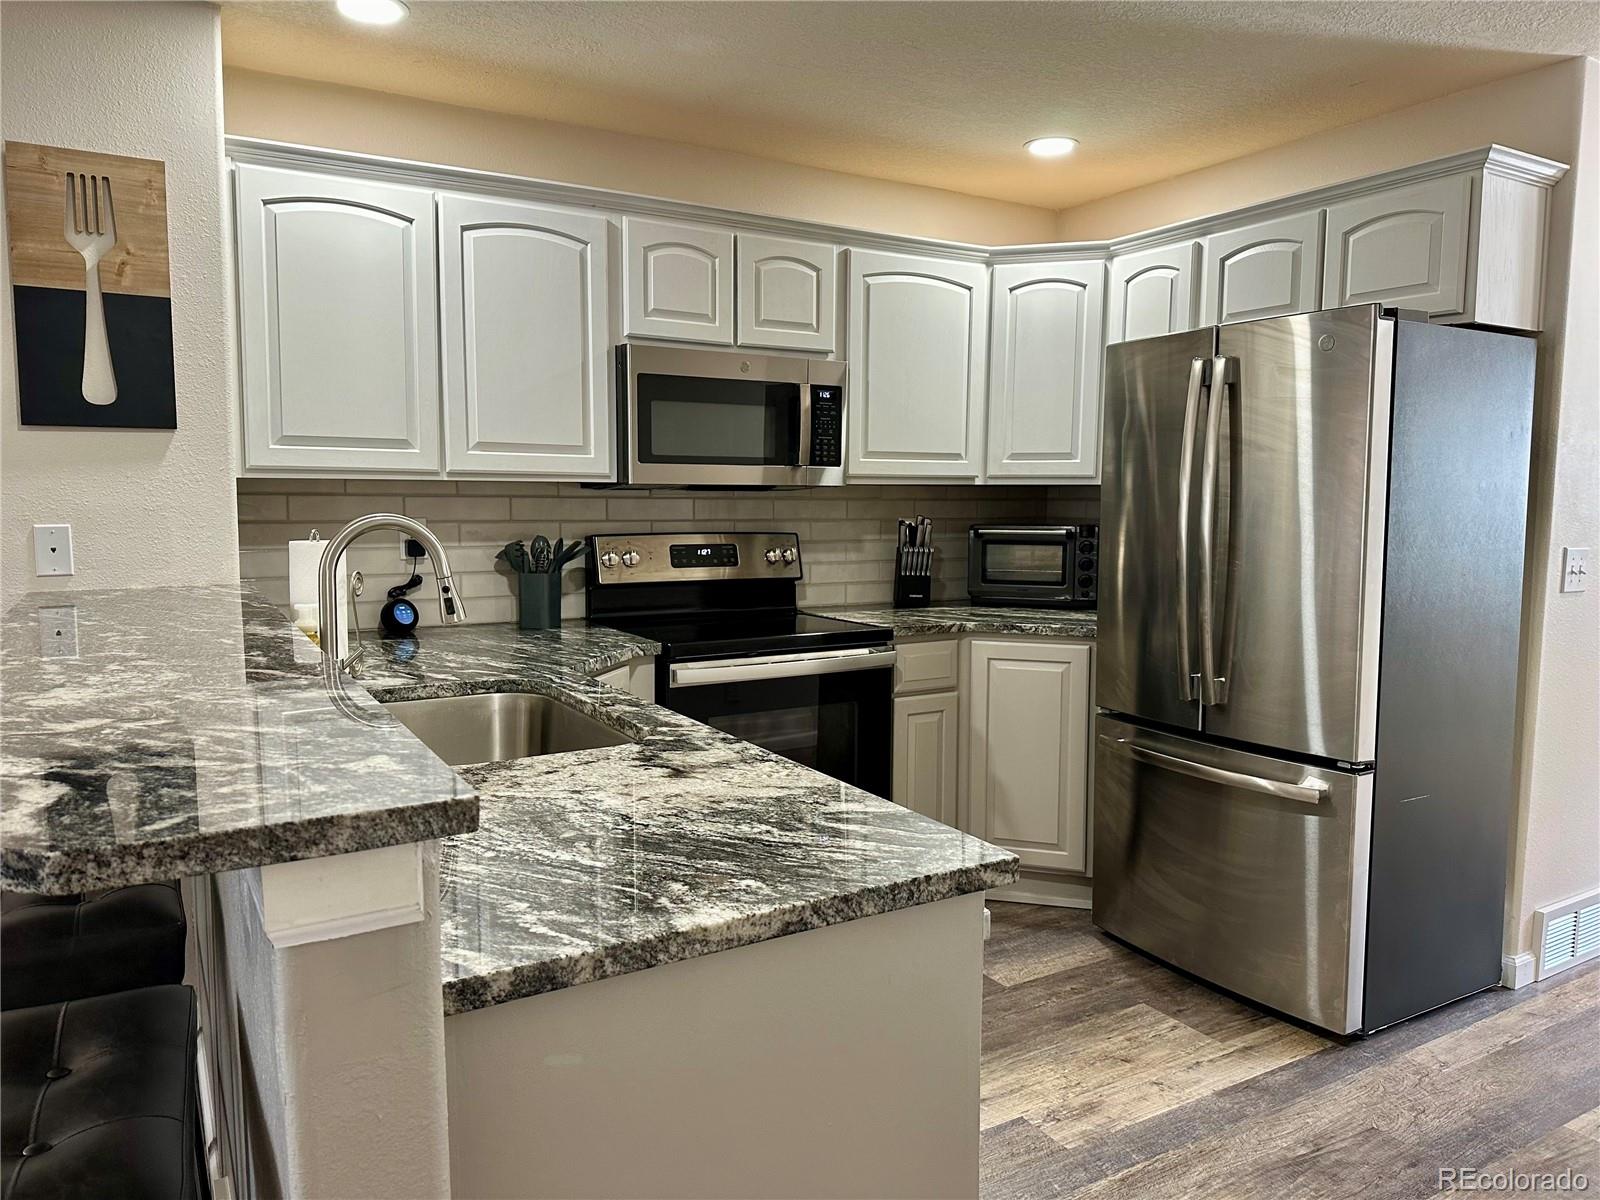 a kitchen with stainless steel appliances granite countertop a refrigerator stove microwave sink and cabinets